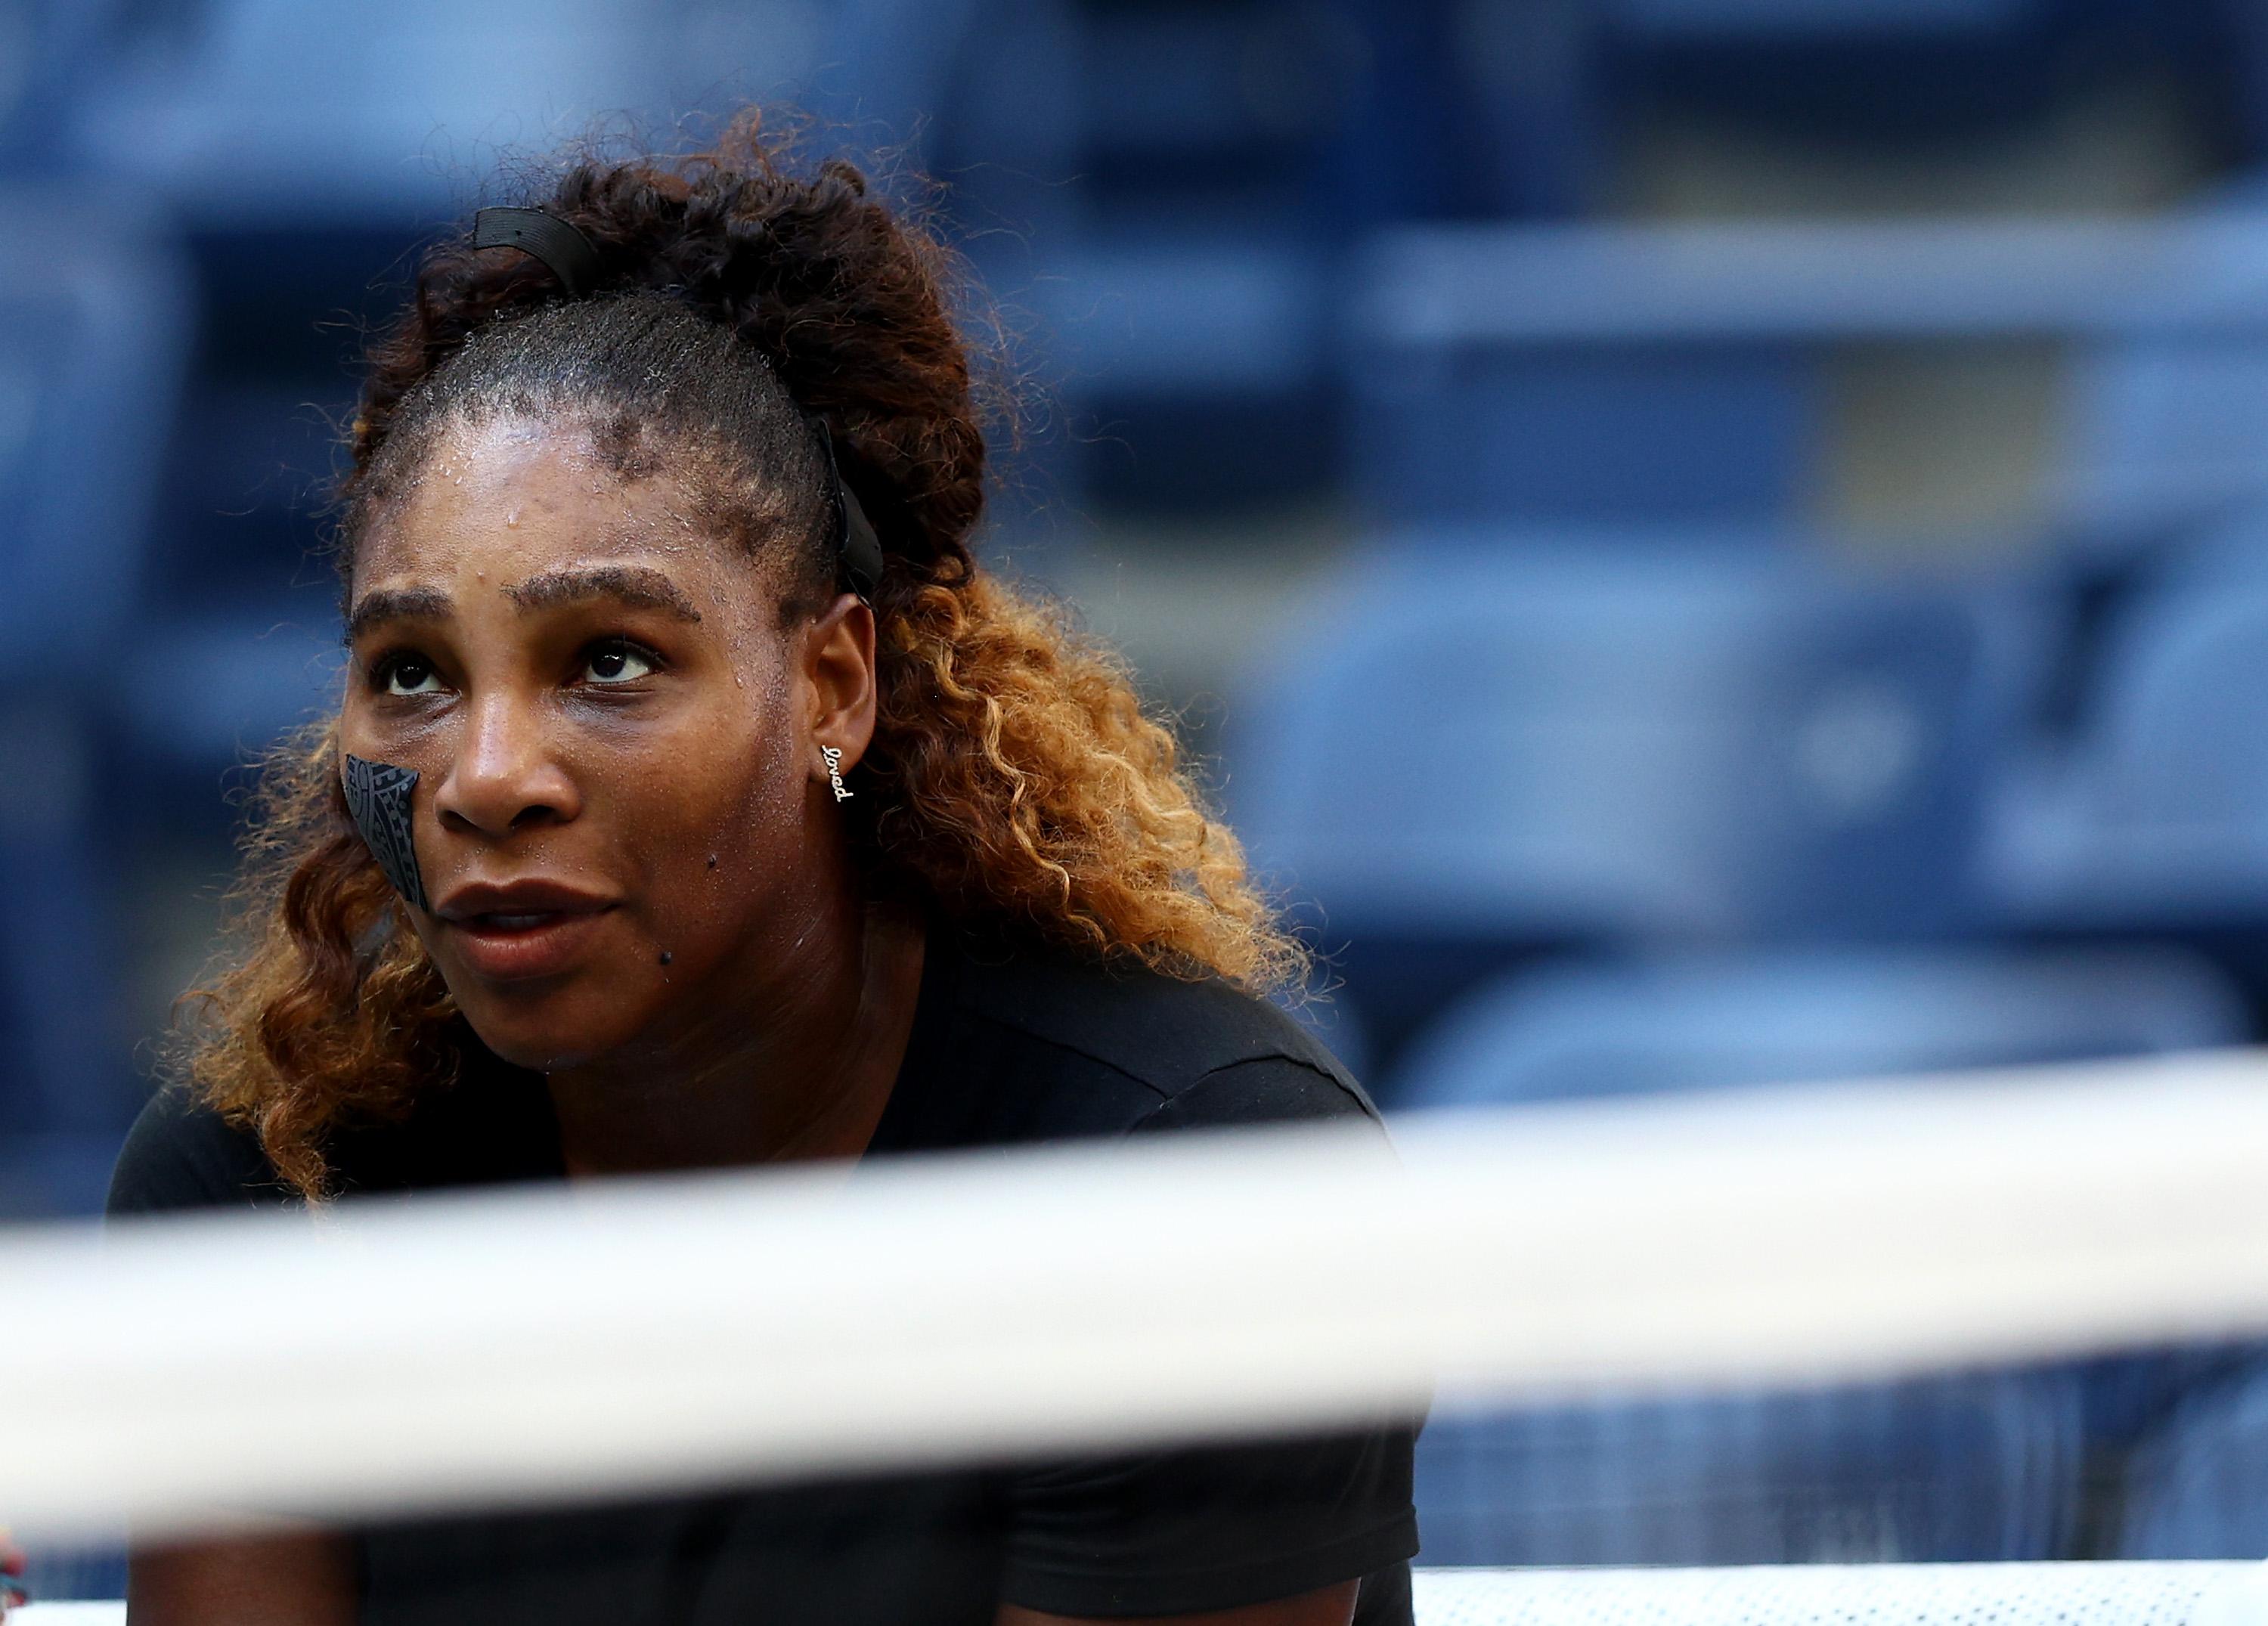 Serena crouches and peers over the net